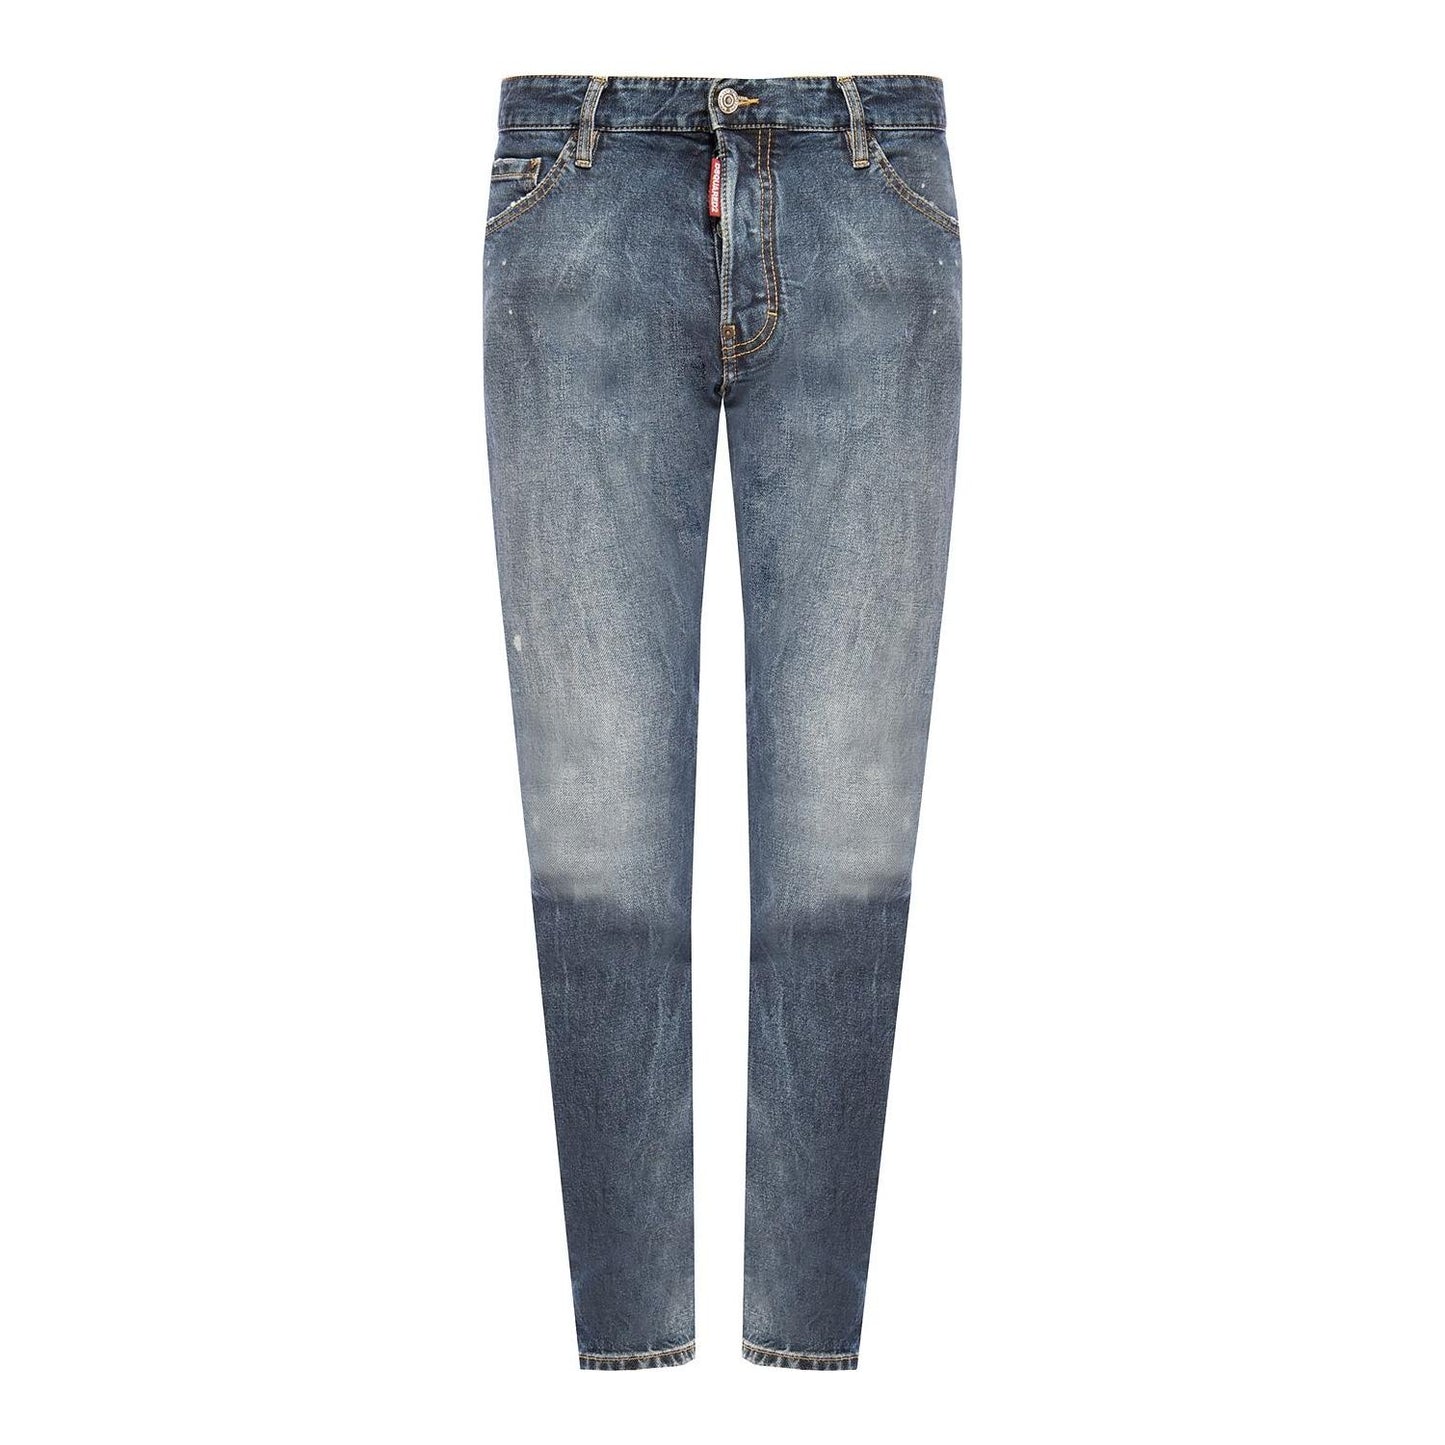 Dsquared² Sleek Navy Distressed Cool Guy Jeans blue-cotton-jeans-pants-3 stock_product_image_4218_1452490902-e6f0ff46-f57_d1c1a8f9-8f70-4f2a-8789-7b70ed5fdba3.jpg